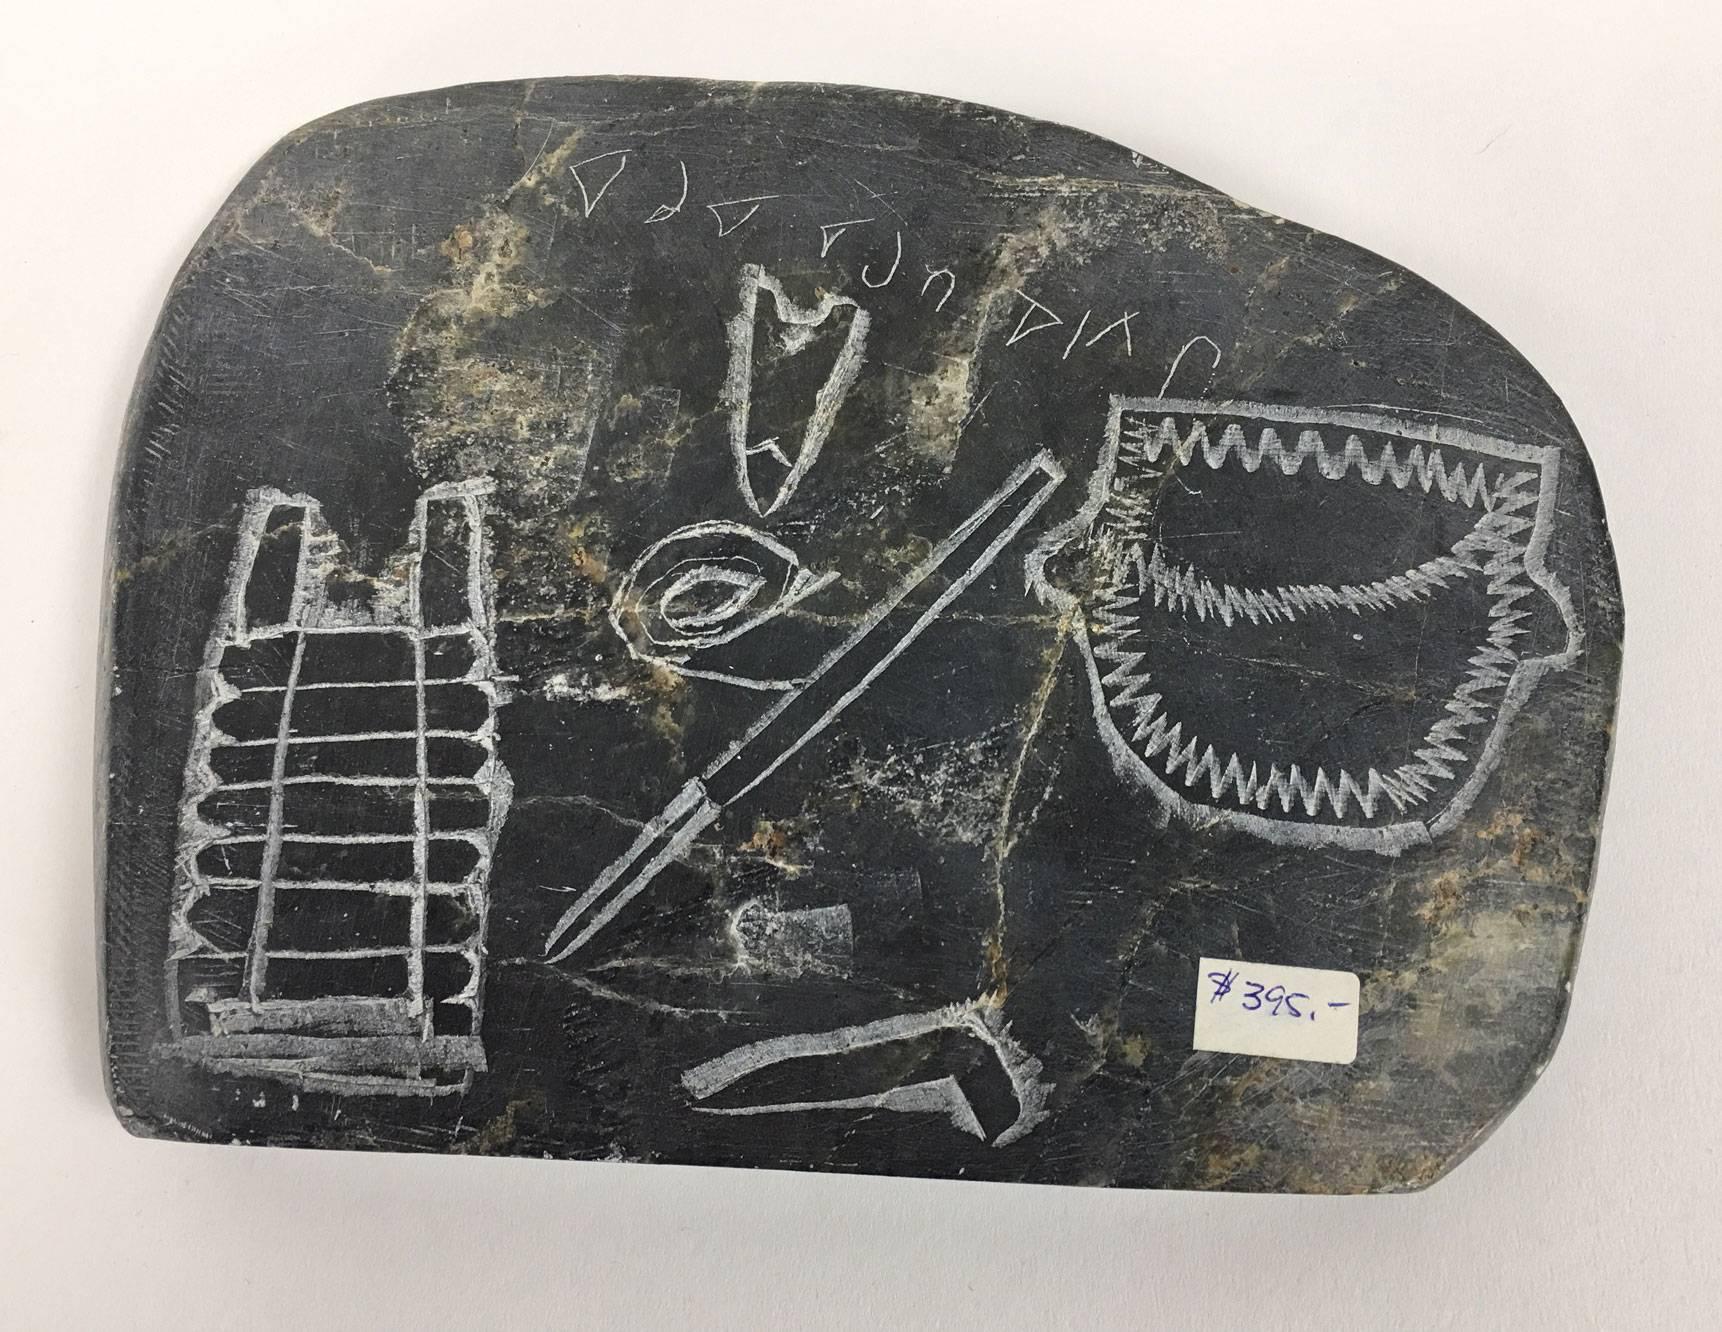 Inuit Eskimo art hunting fishing hieroglyphics stone sculpture carving depicting hand-carved articles of clothing, a parka, pants and glove; sticker marked: Inuit ART CANADA; approx. size: 8.5” x 6.25” x 1”.
 